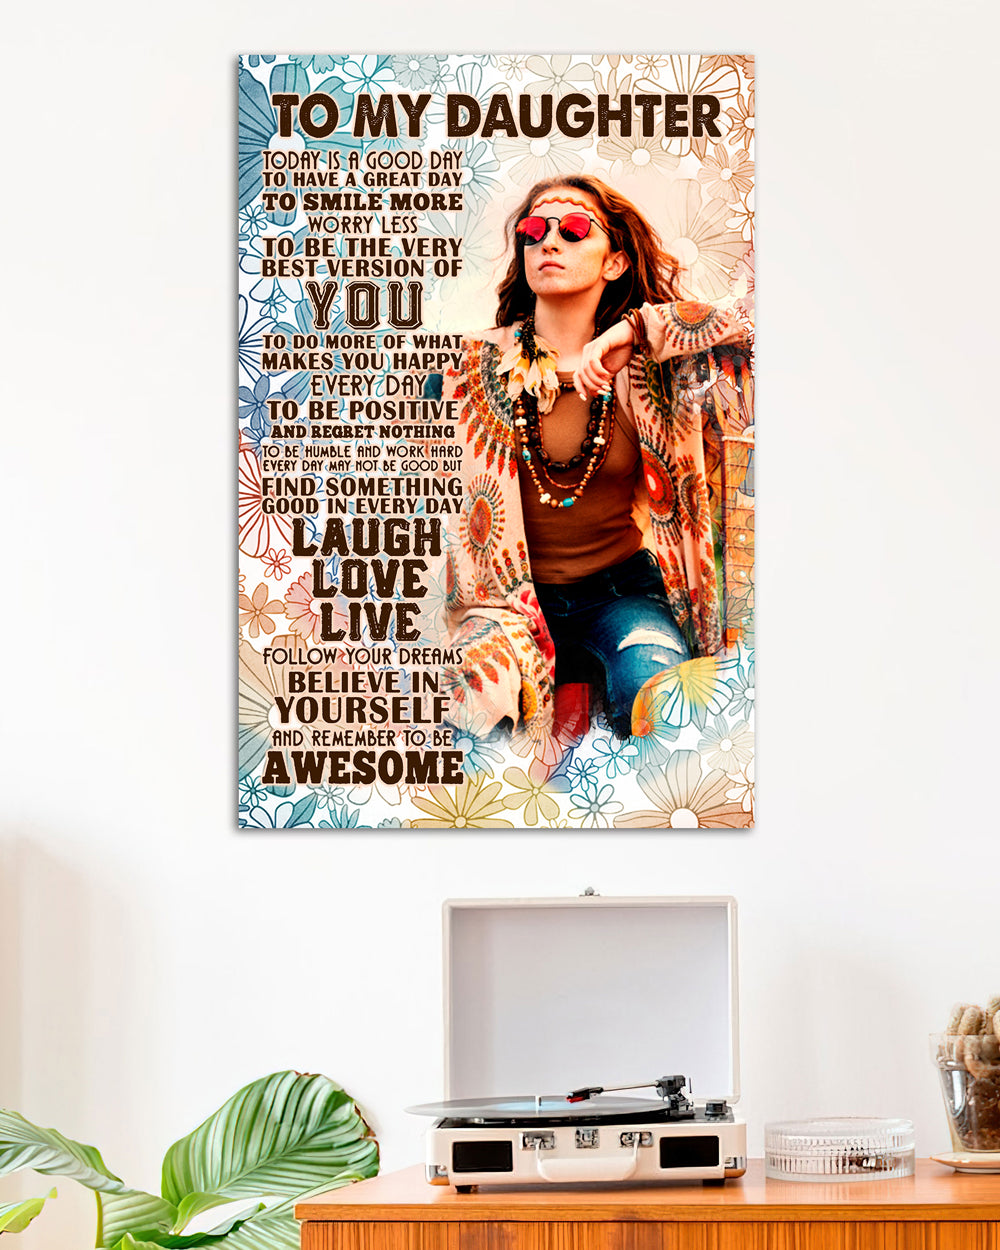 PERSONALIZED TO MY DAUGHTER REMEMBER TO BE AWESOME POSTER - NO2804232